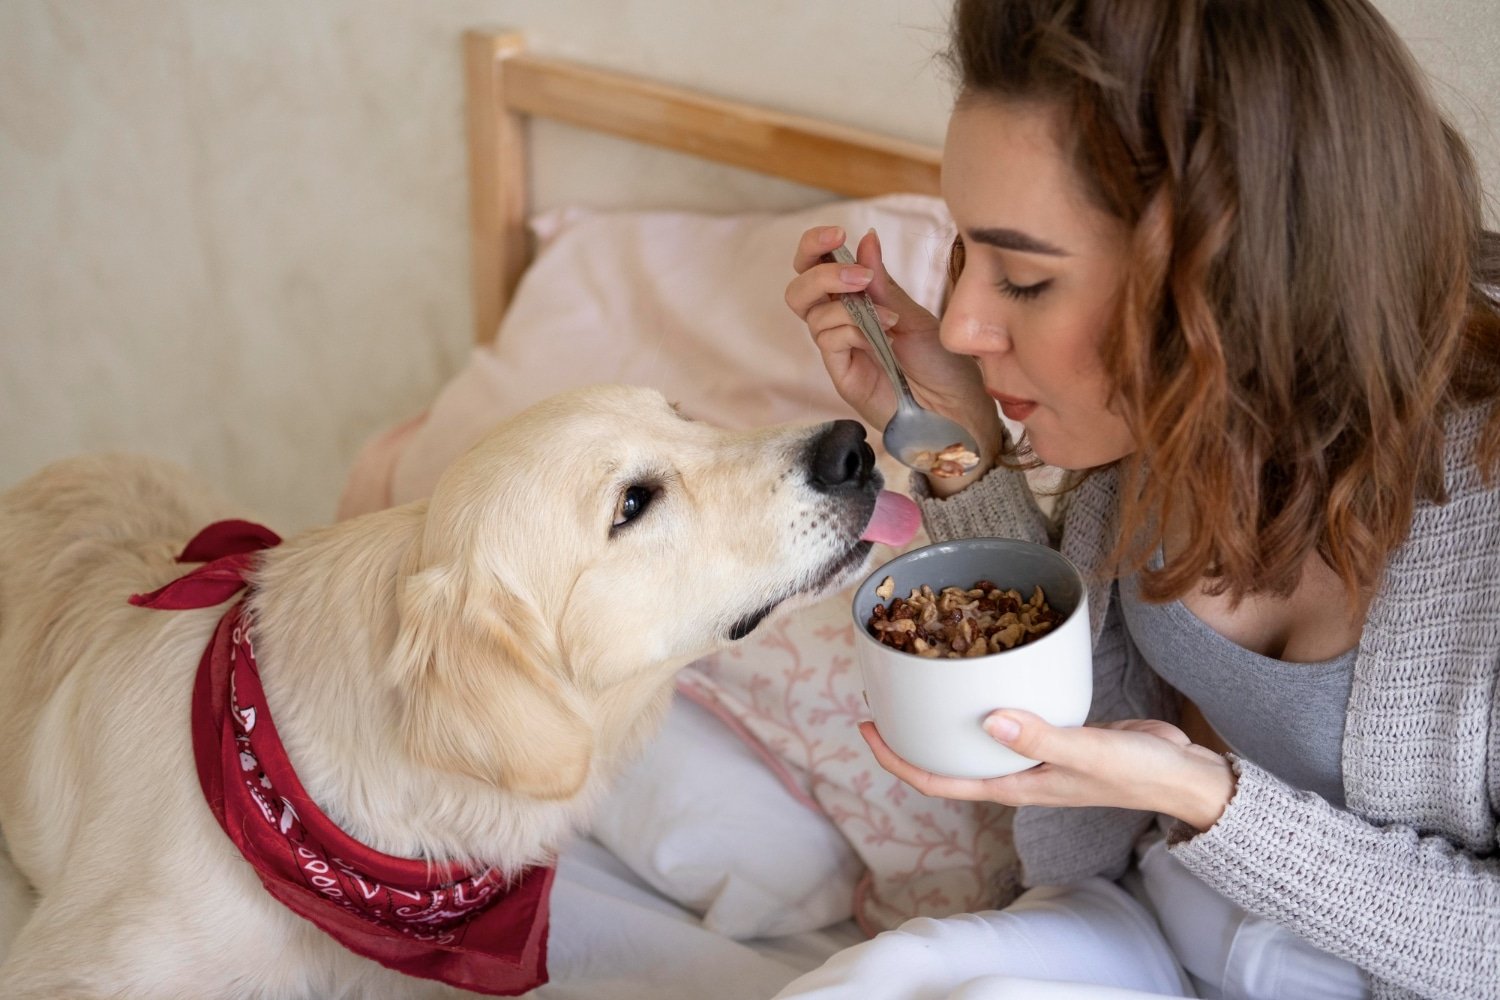 Feed Your Pet The Best With Burns Pet Food’s Nutritious Recipes